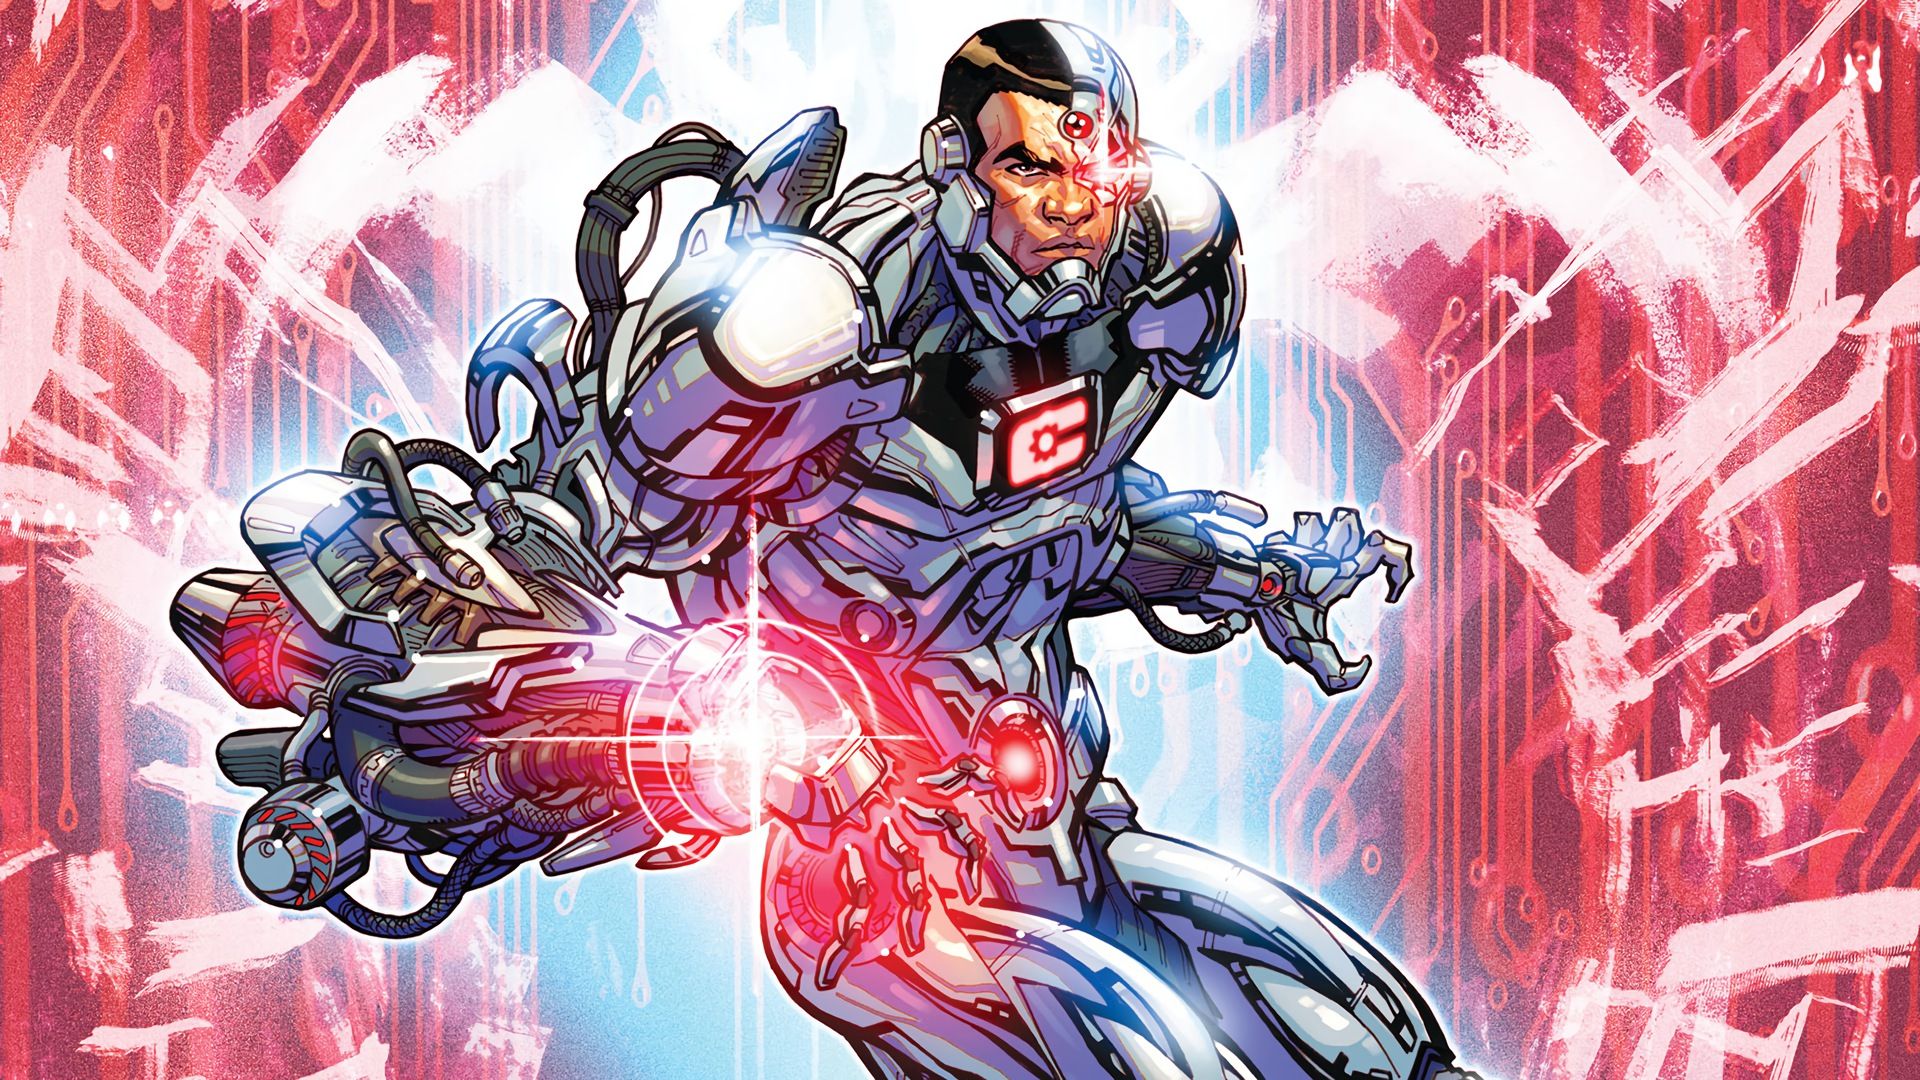 30 Crazy Facts About Cyborg’s Body